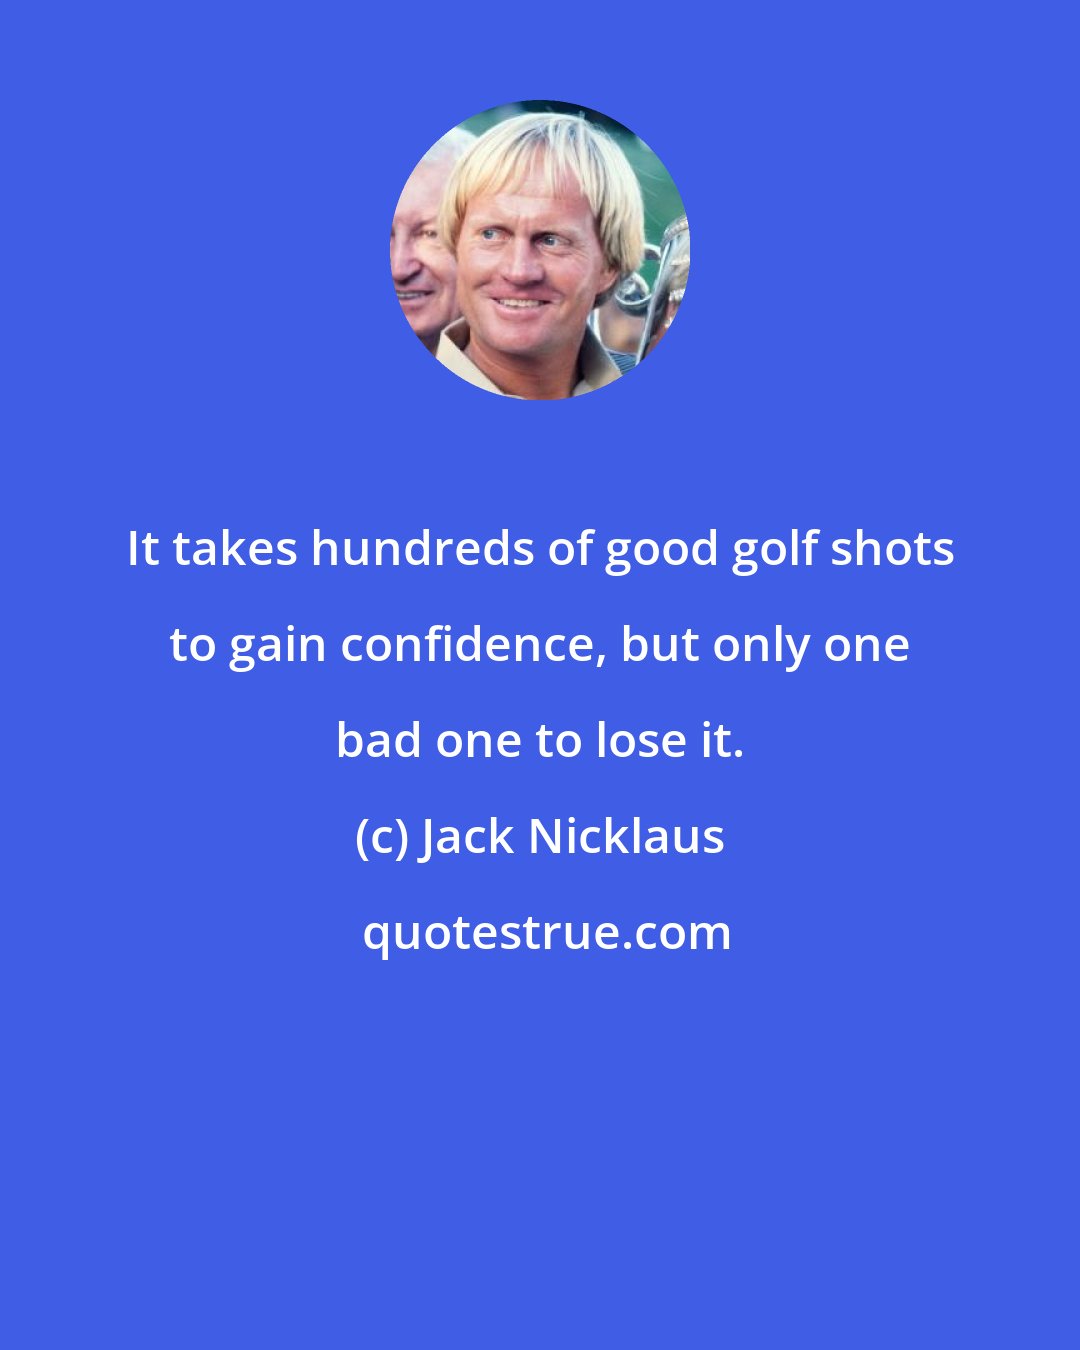 Jack Nicklaus: It takes hundreds of good golf shots to gain confidence, but only one bad one to lose it.